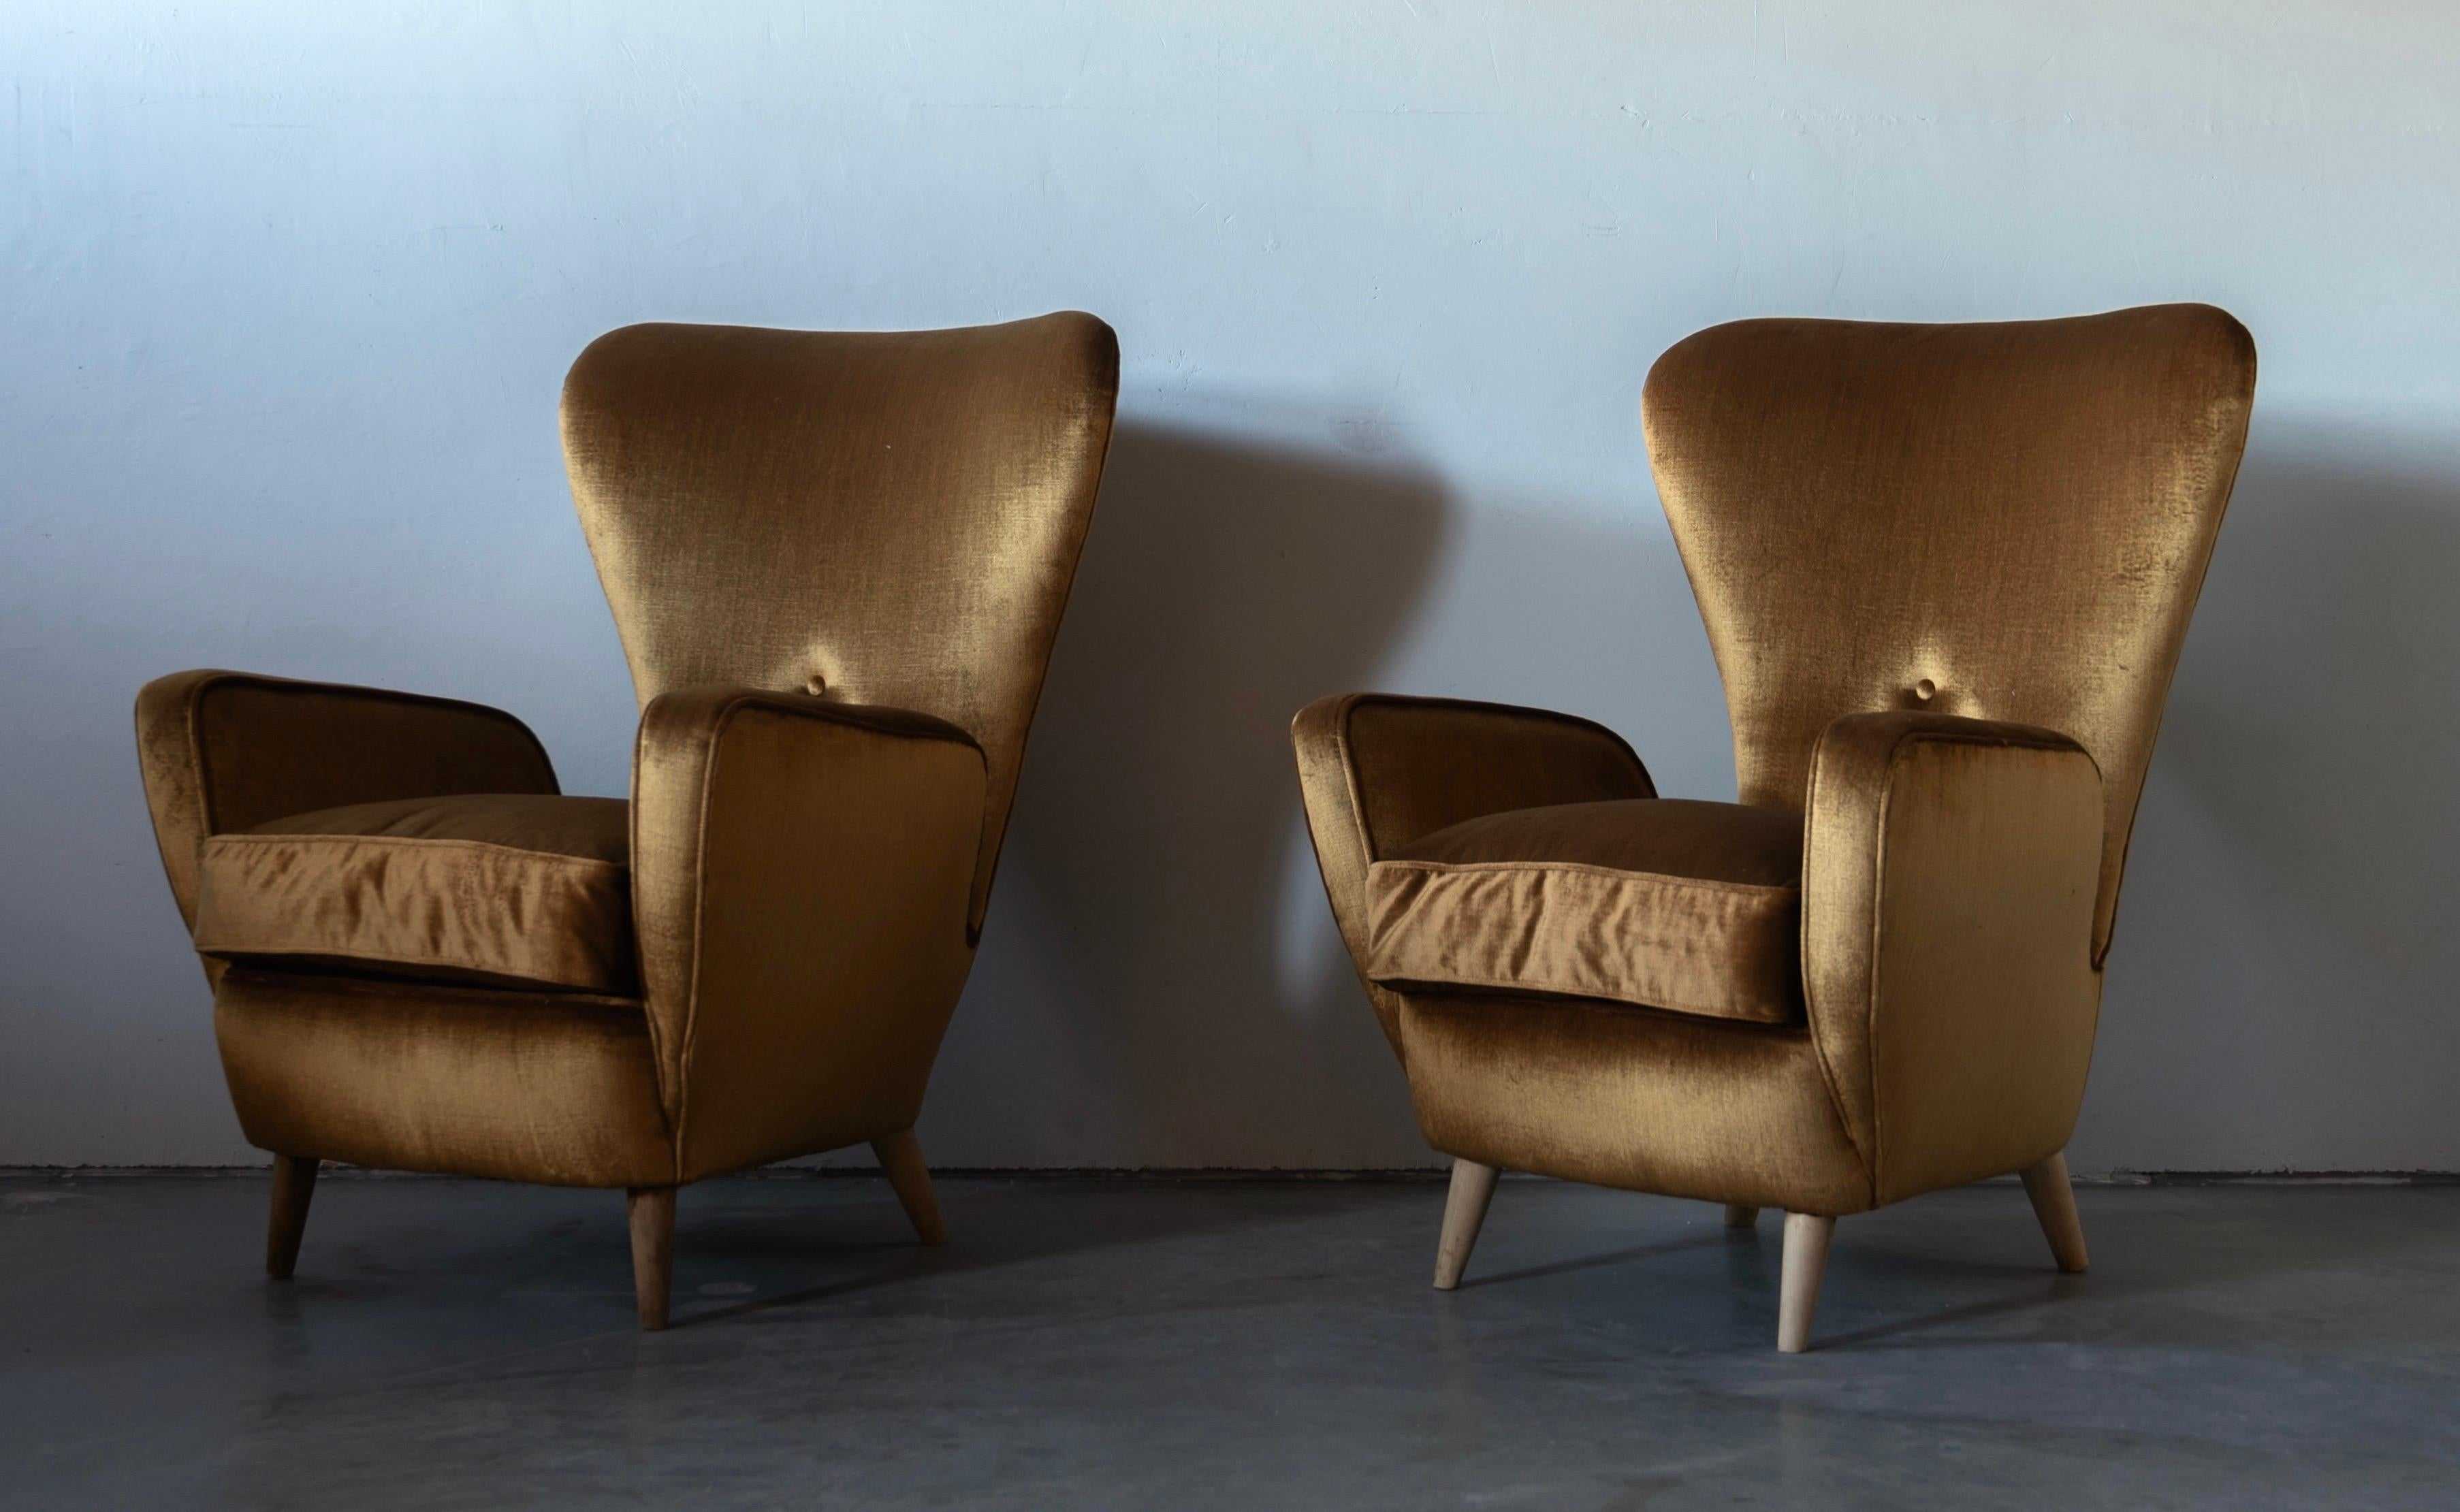 A pair of organic lounge chairs / high-back chairs. Designed and produced in Italy, 1950s. Features an overstuffed form on bleached wooden legs. Vintage fabric. 

Other designers of the period include Guglielmo Veronesi, Federico Munari, Gio